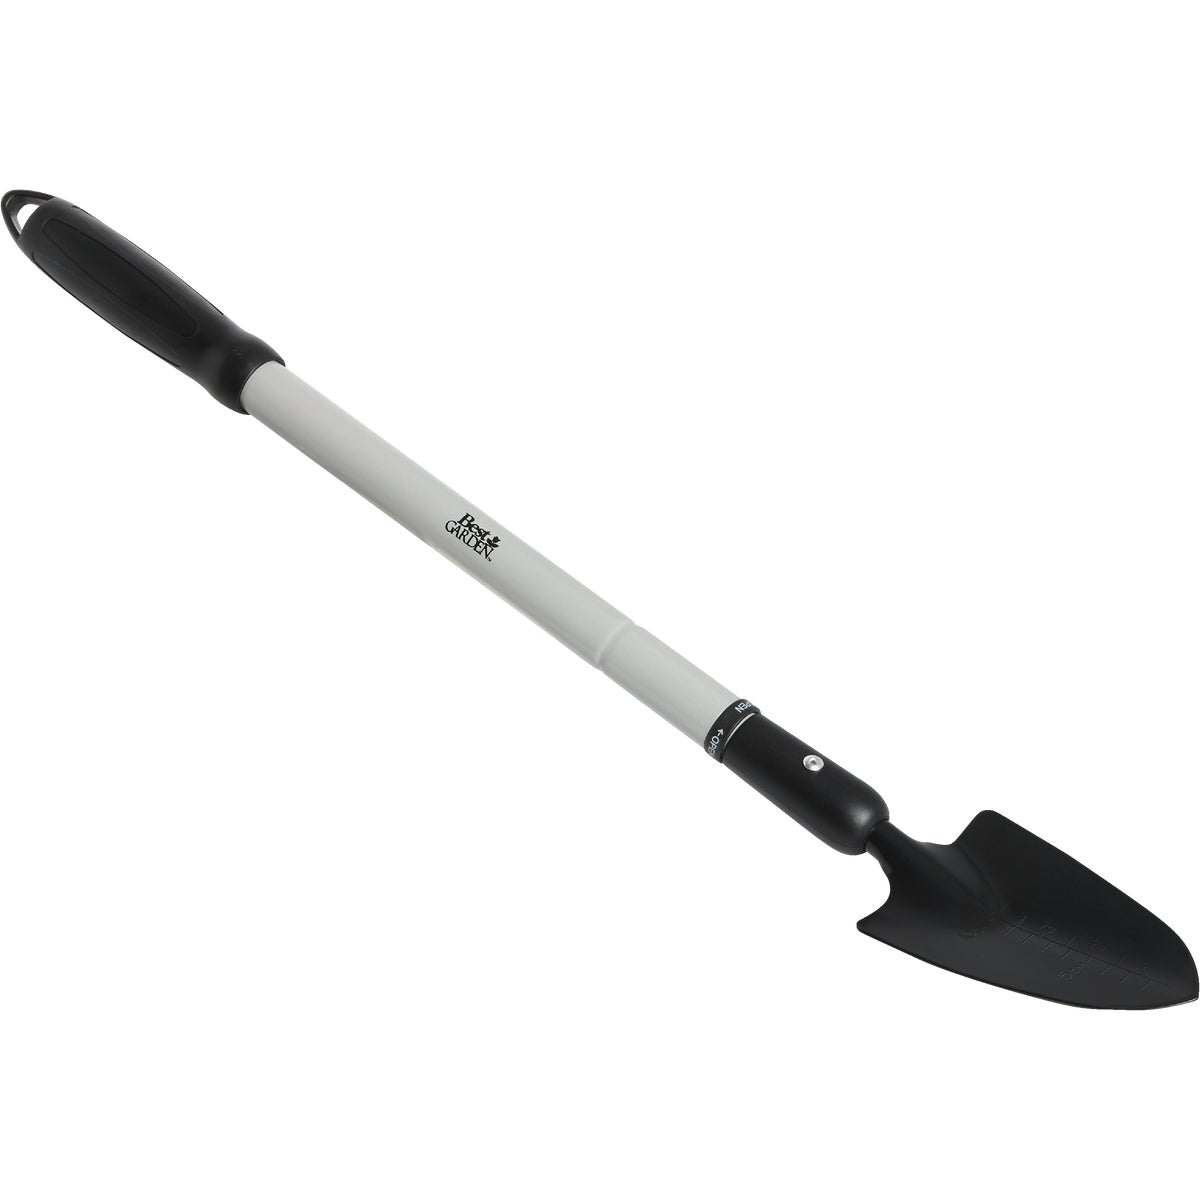 Item 703881, Extendable trowel has a lightweight steel handle that extends from 18" to 